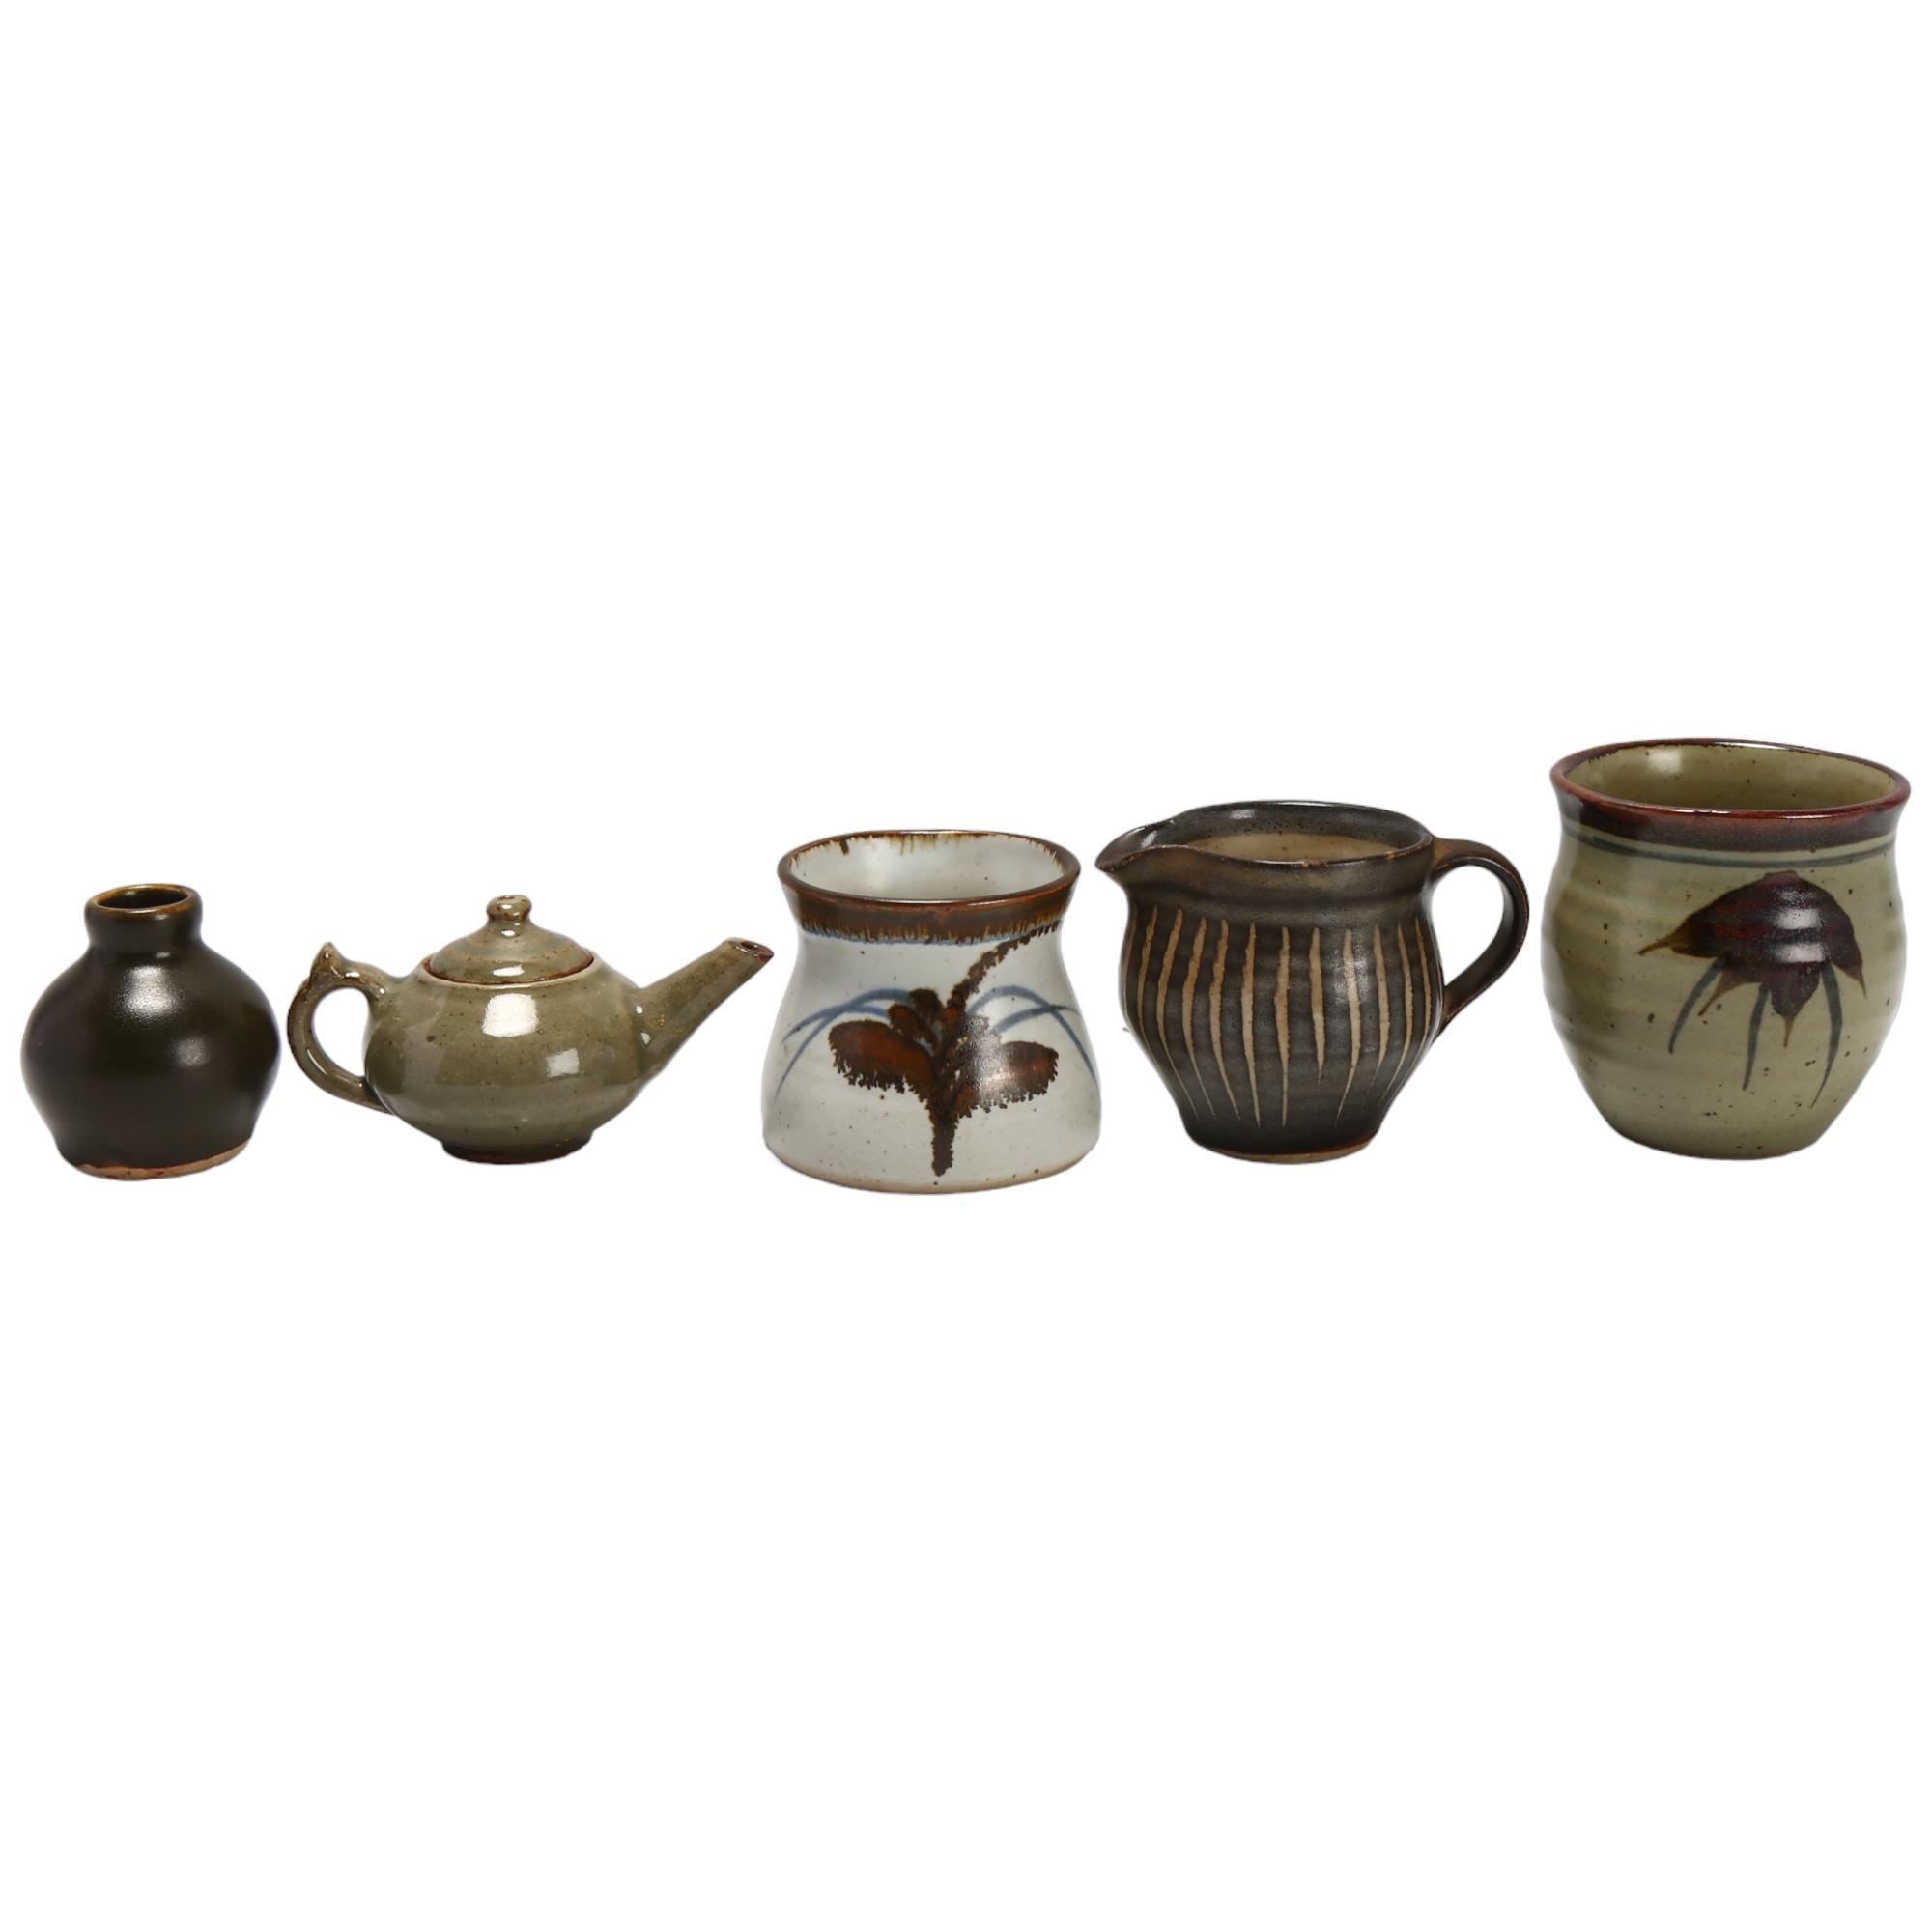 5 pieces of Leach tradition studio pottery, including St Ives, Lowerdown and Wenford Bridge